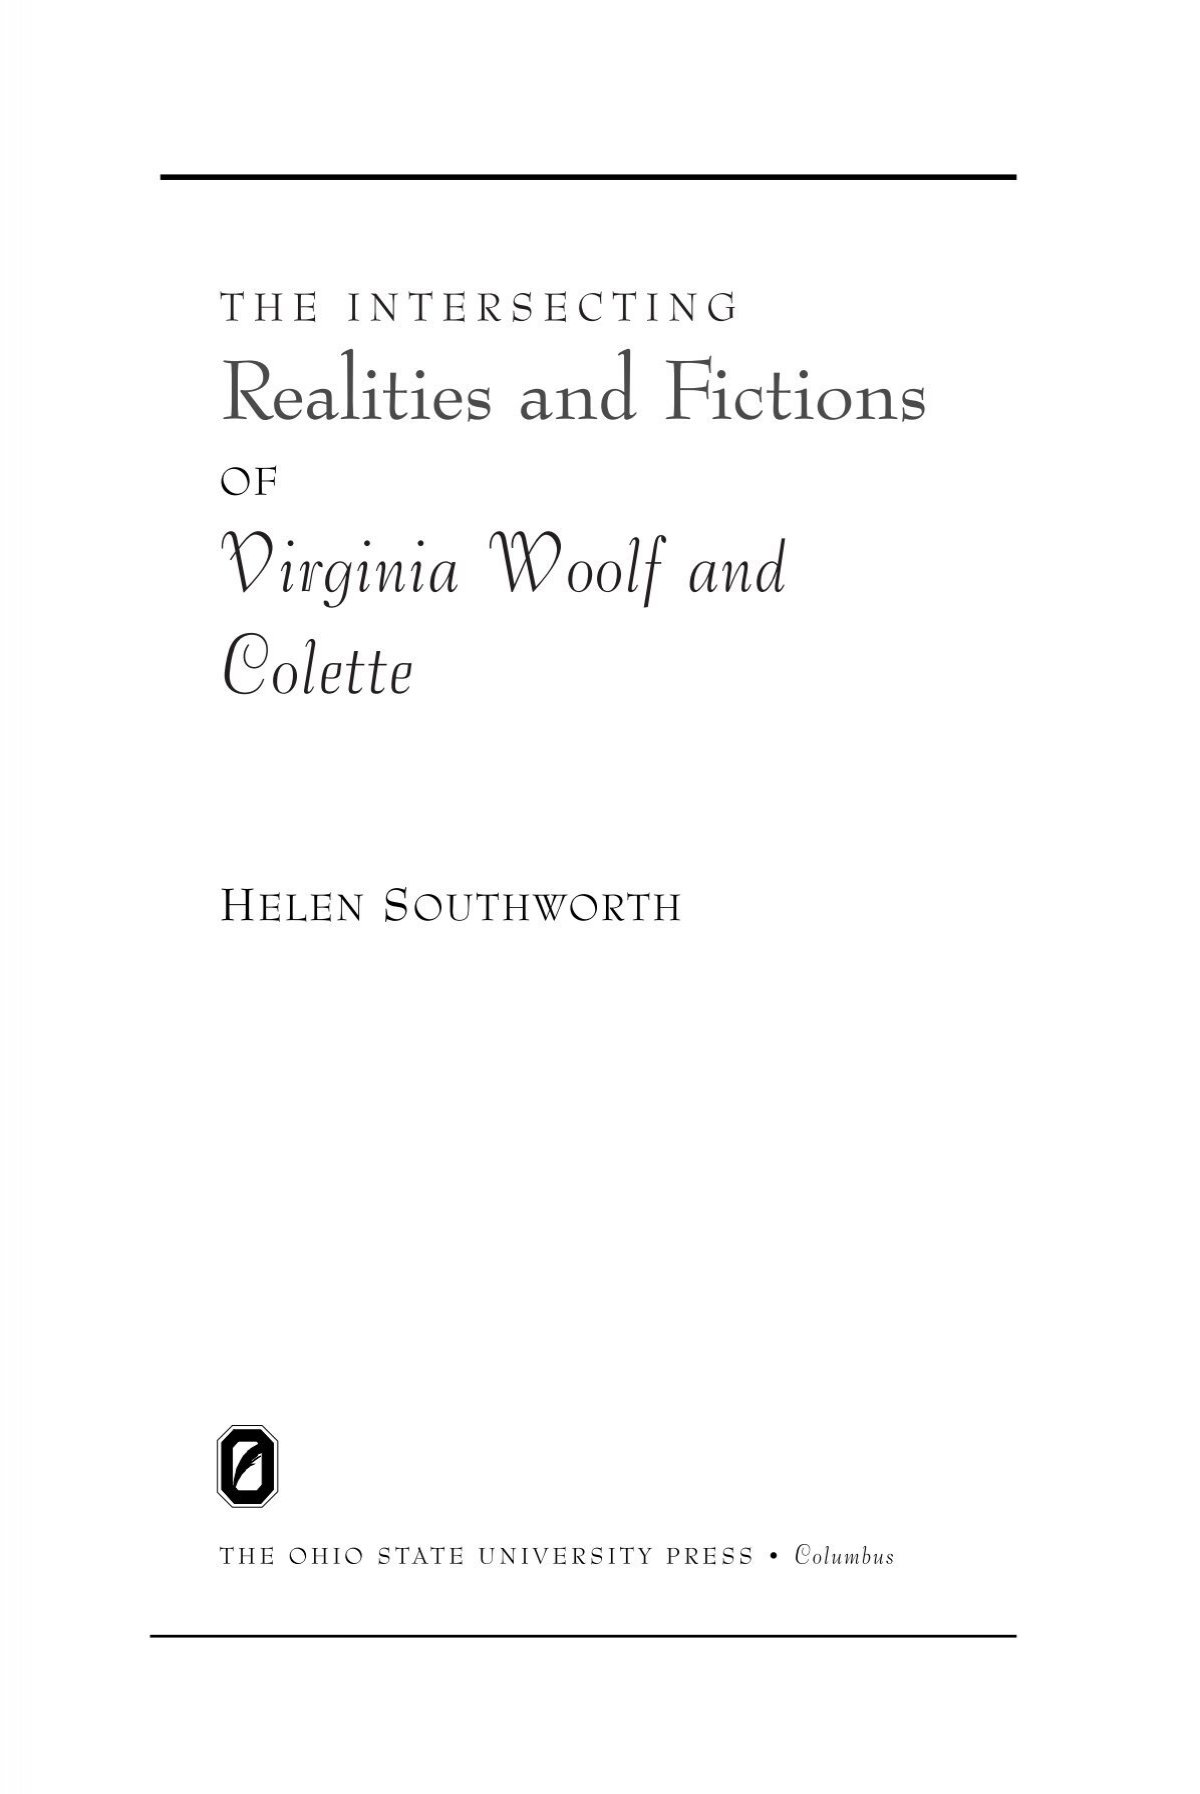 Virginia Woolf and Colette - The Ohio State University Press